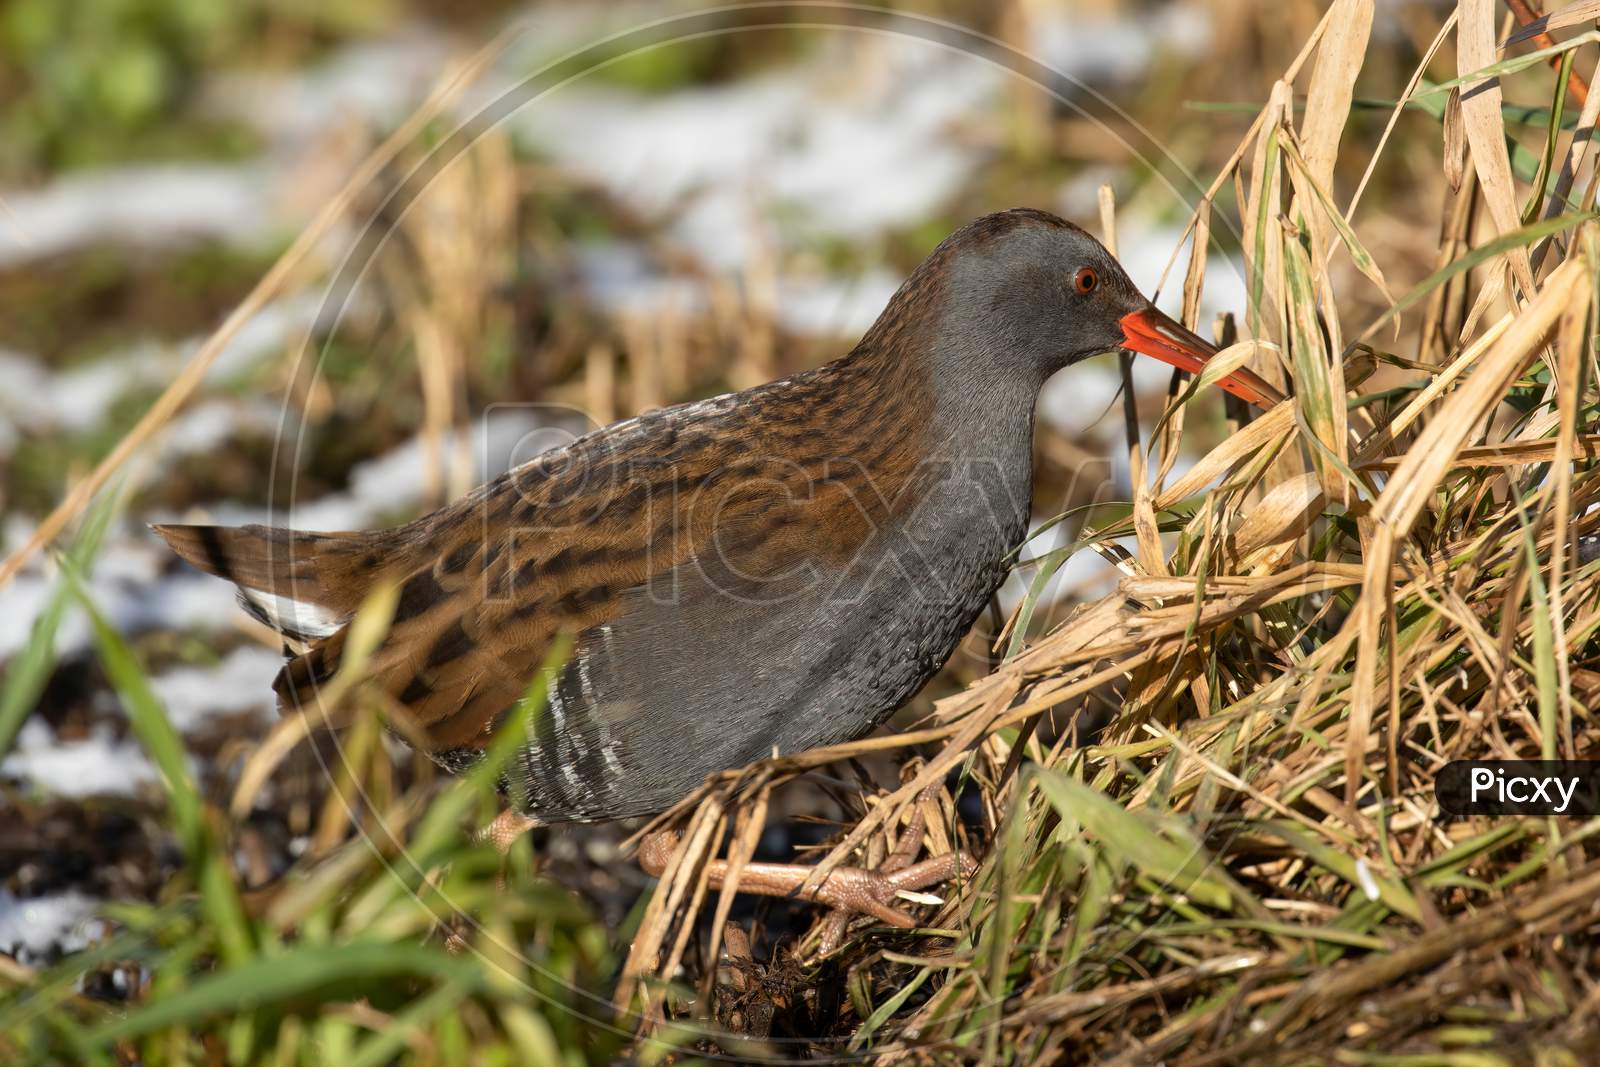 Rare shy Water Rail, Rallus Aquaticus, walking through frozen reed beds on snowy winter morning